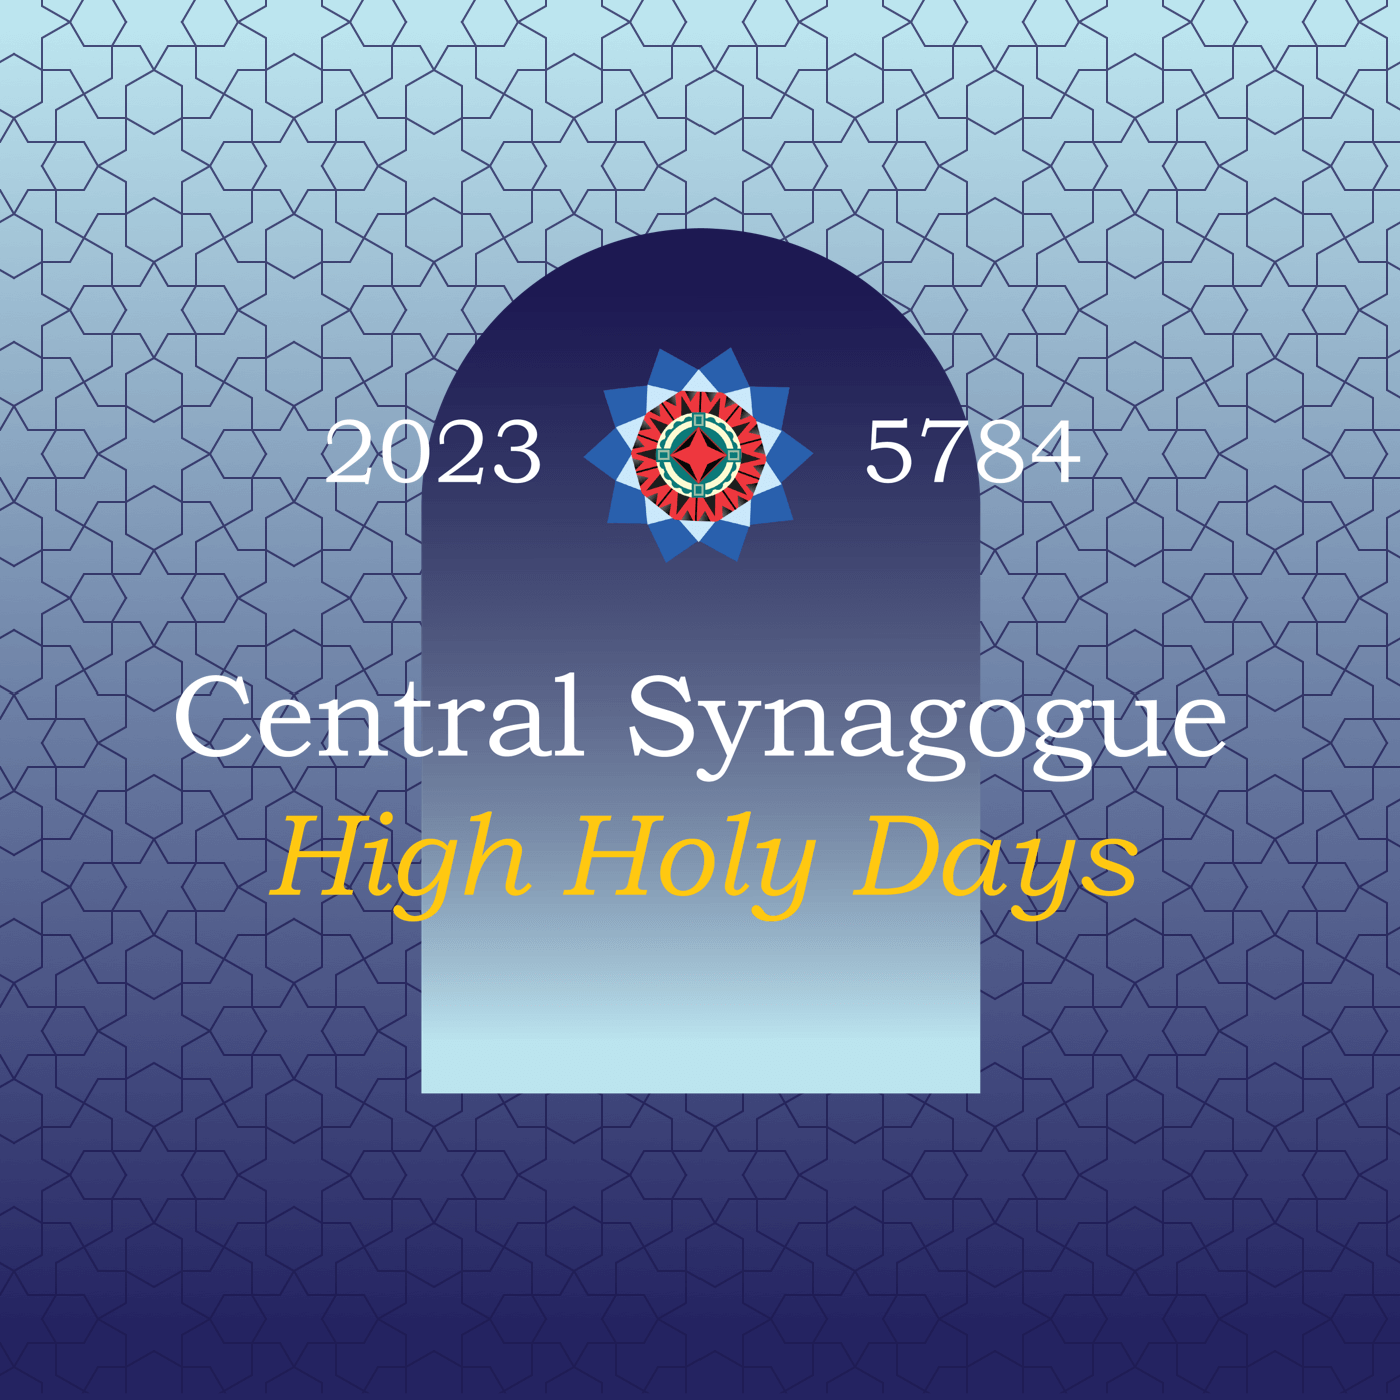 Central Synagogue High Holy Days 2023